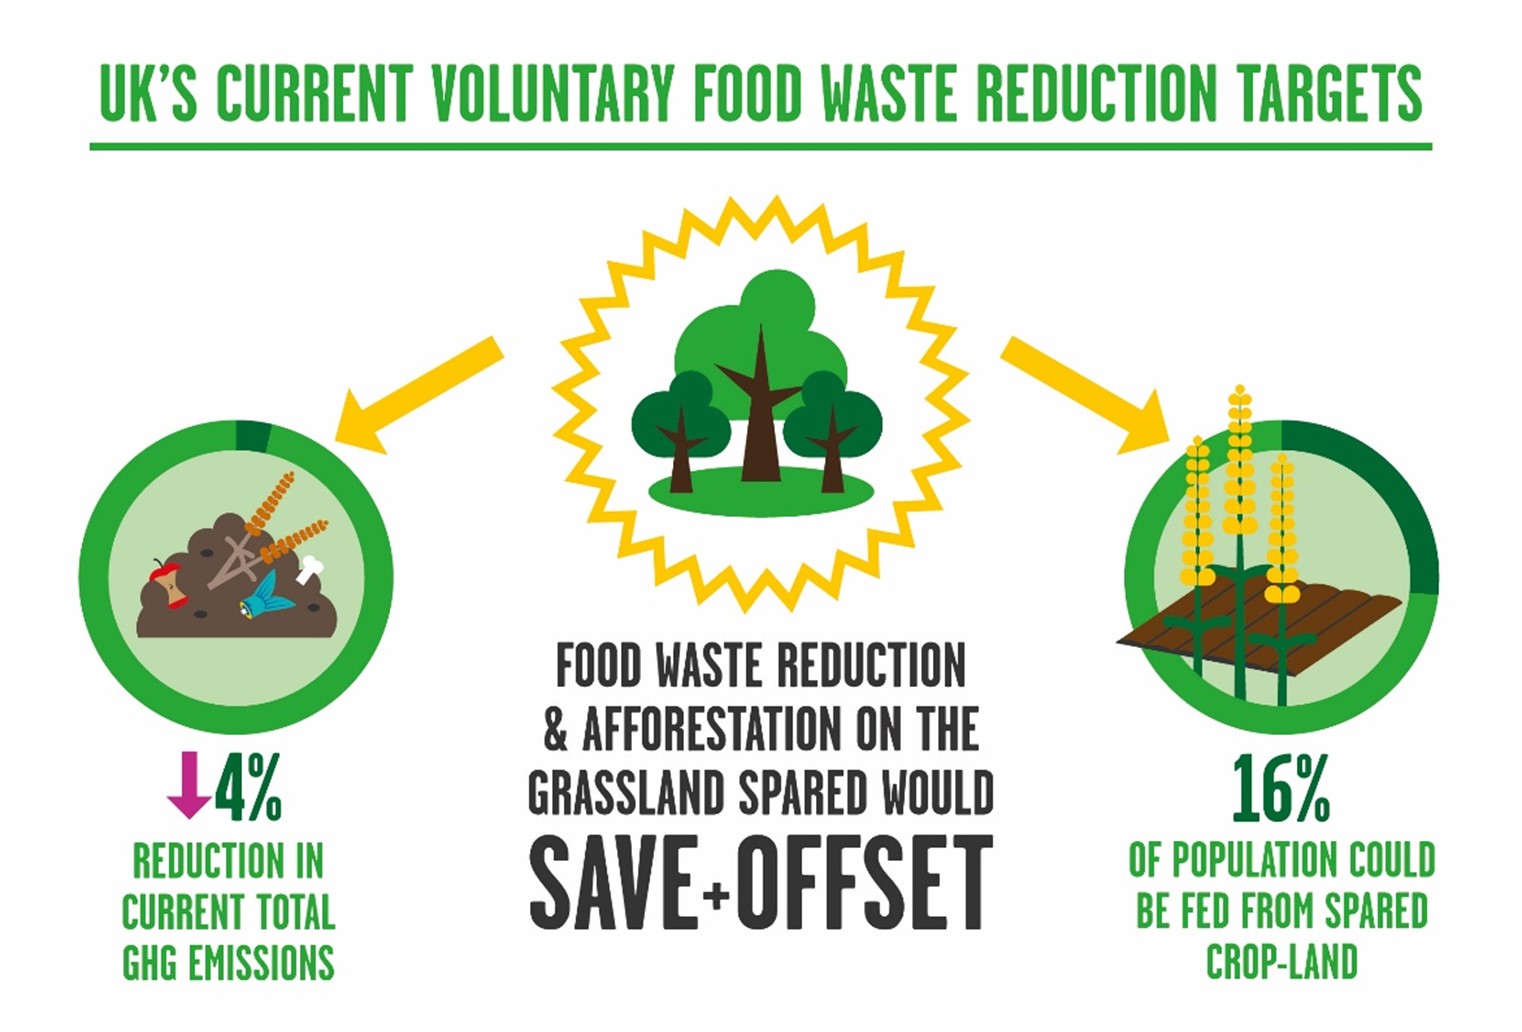 Figure: UK's current voluntary food waste reduction targets